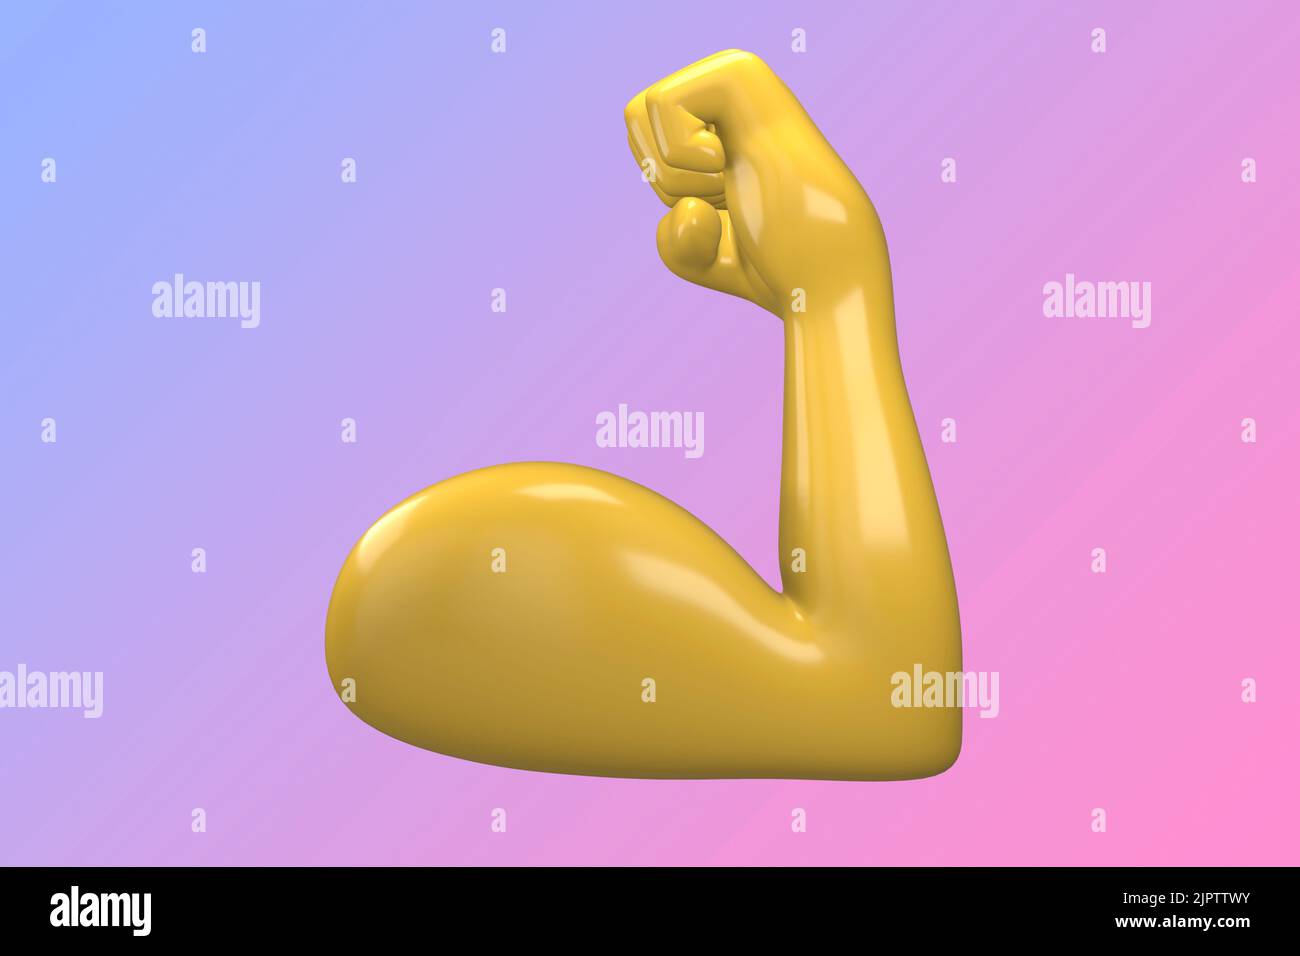 Emoji. Emoticons. 3D rendering of emoji isolated on a gradient background. Space to write. Illustration. 3D illustration. Isolated background. Stock Photo